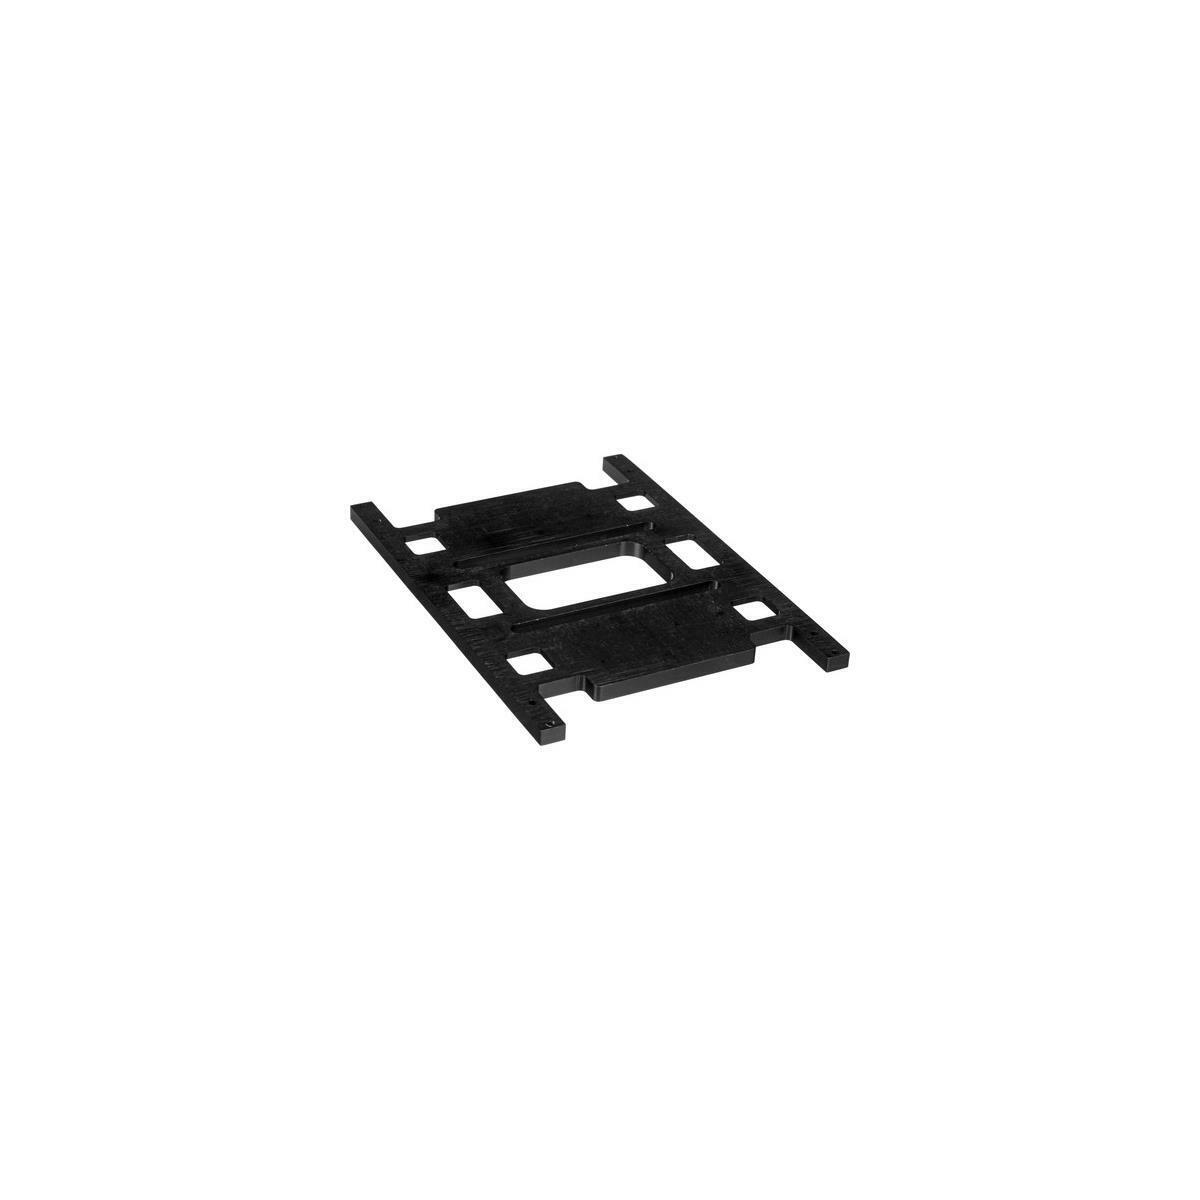 CineMilled Mount Plate for DJI Ronin-M Gimbal  S1000 Octocopter Drone #CM-810